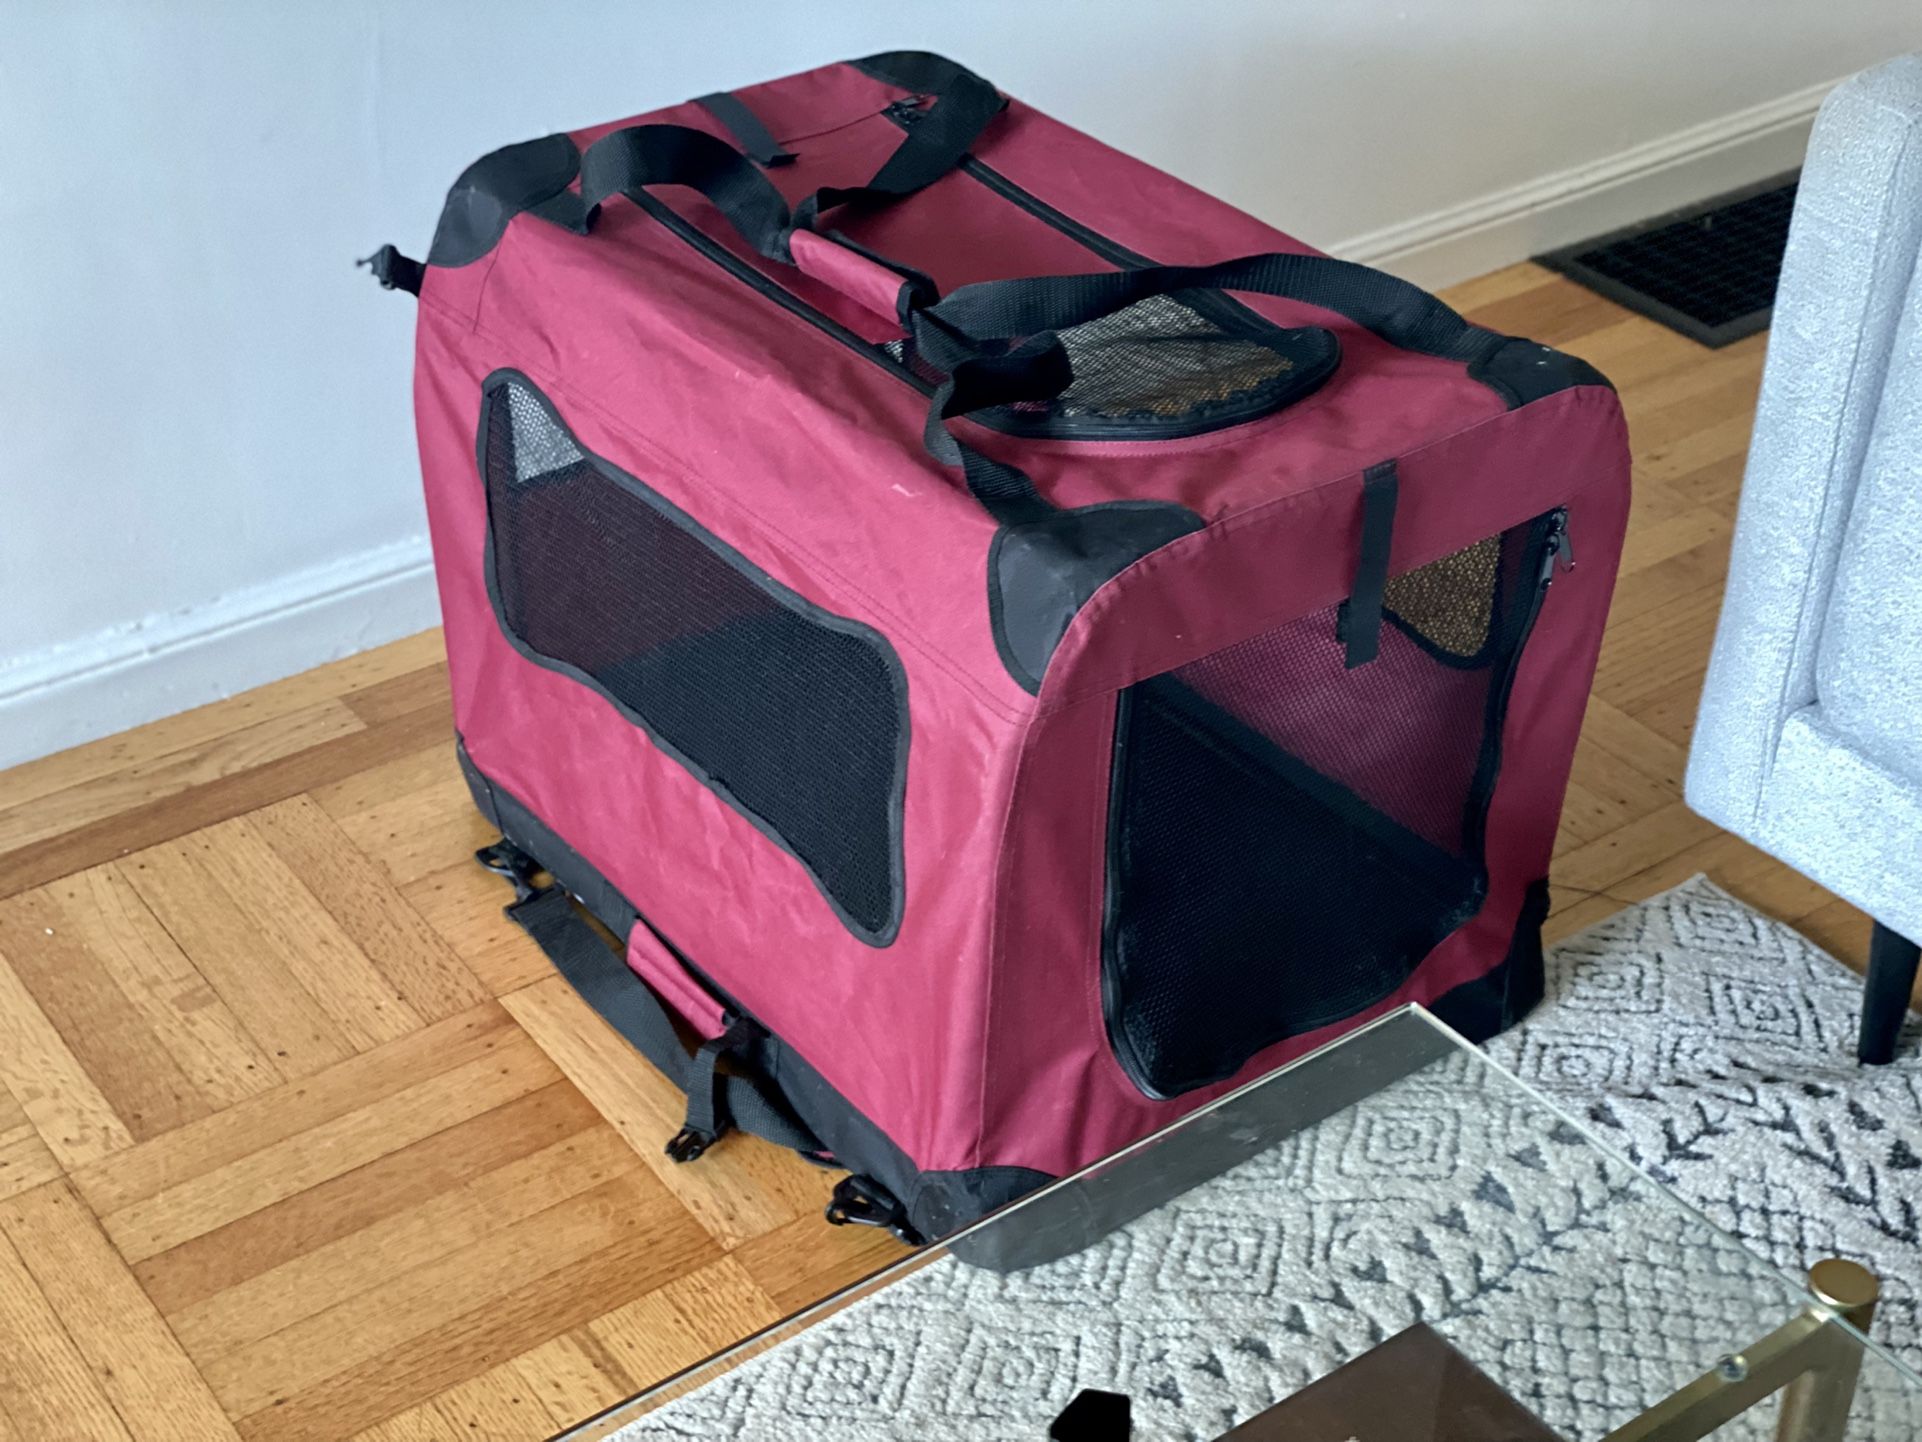 Soft, Portable Foldable Dog Crate - Travel-friendly